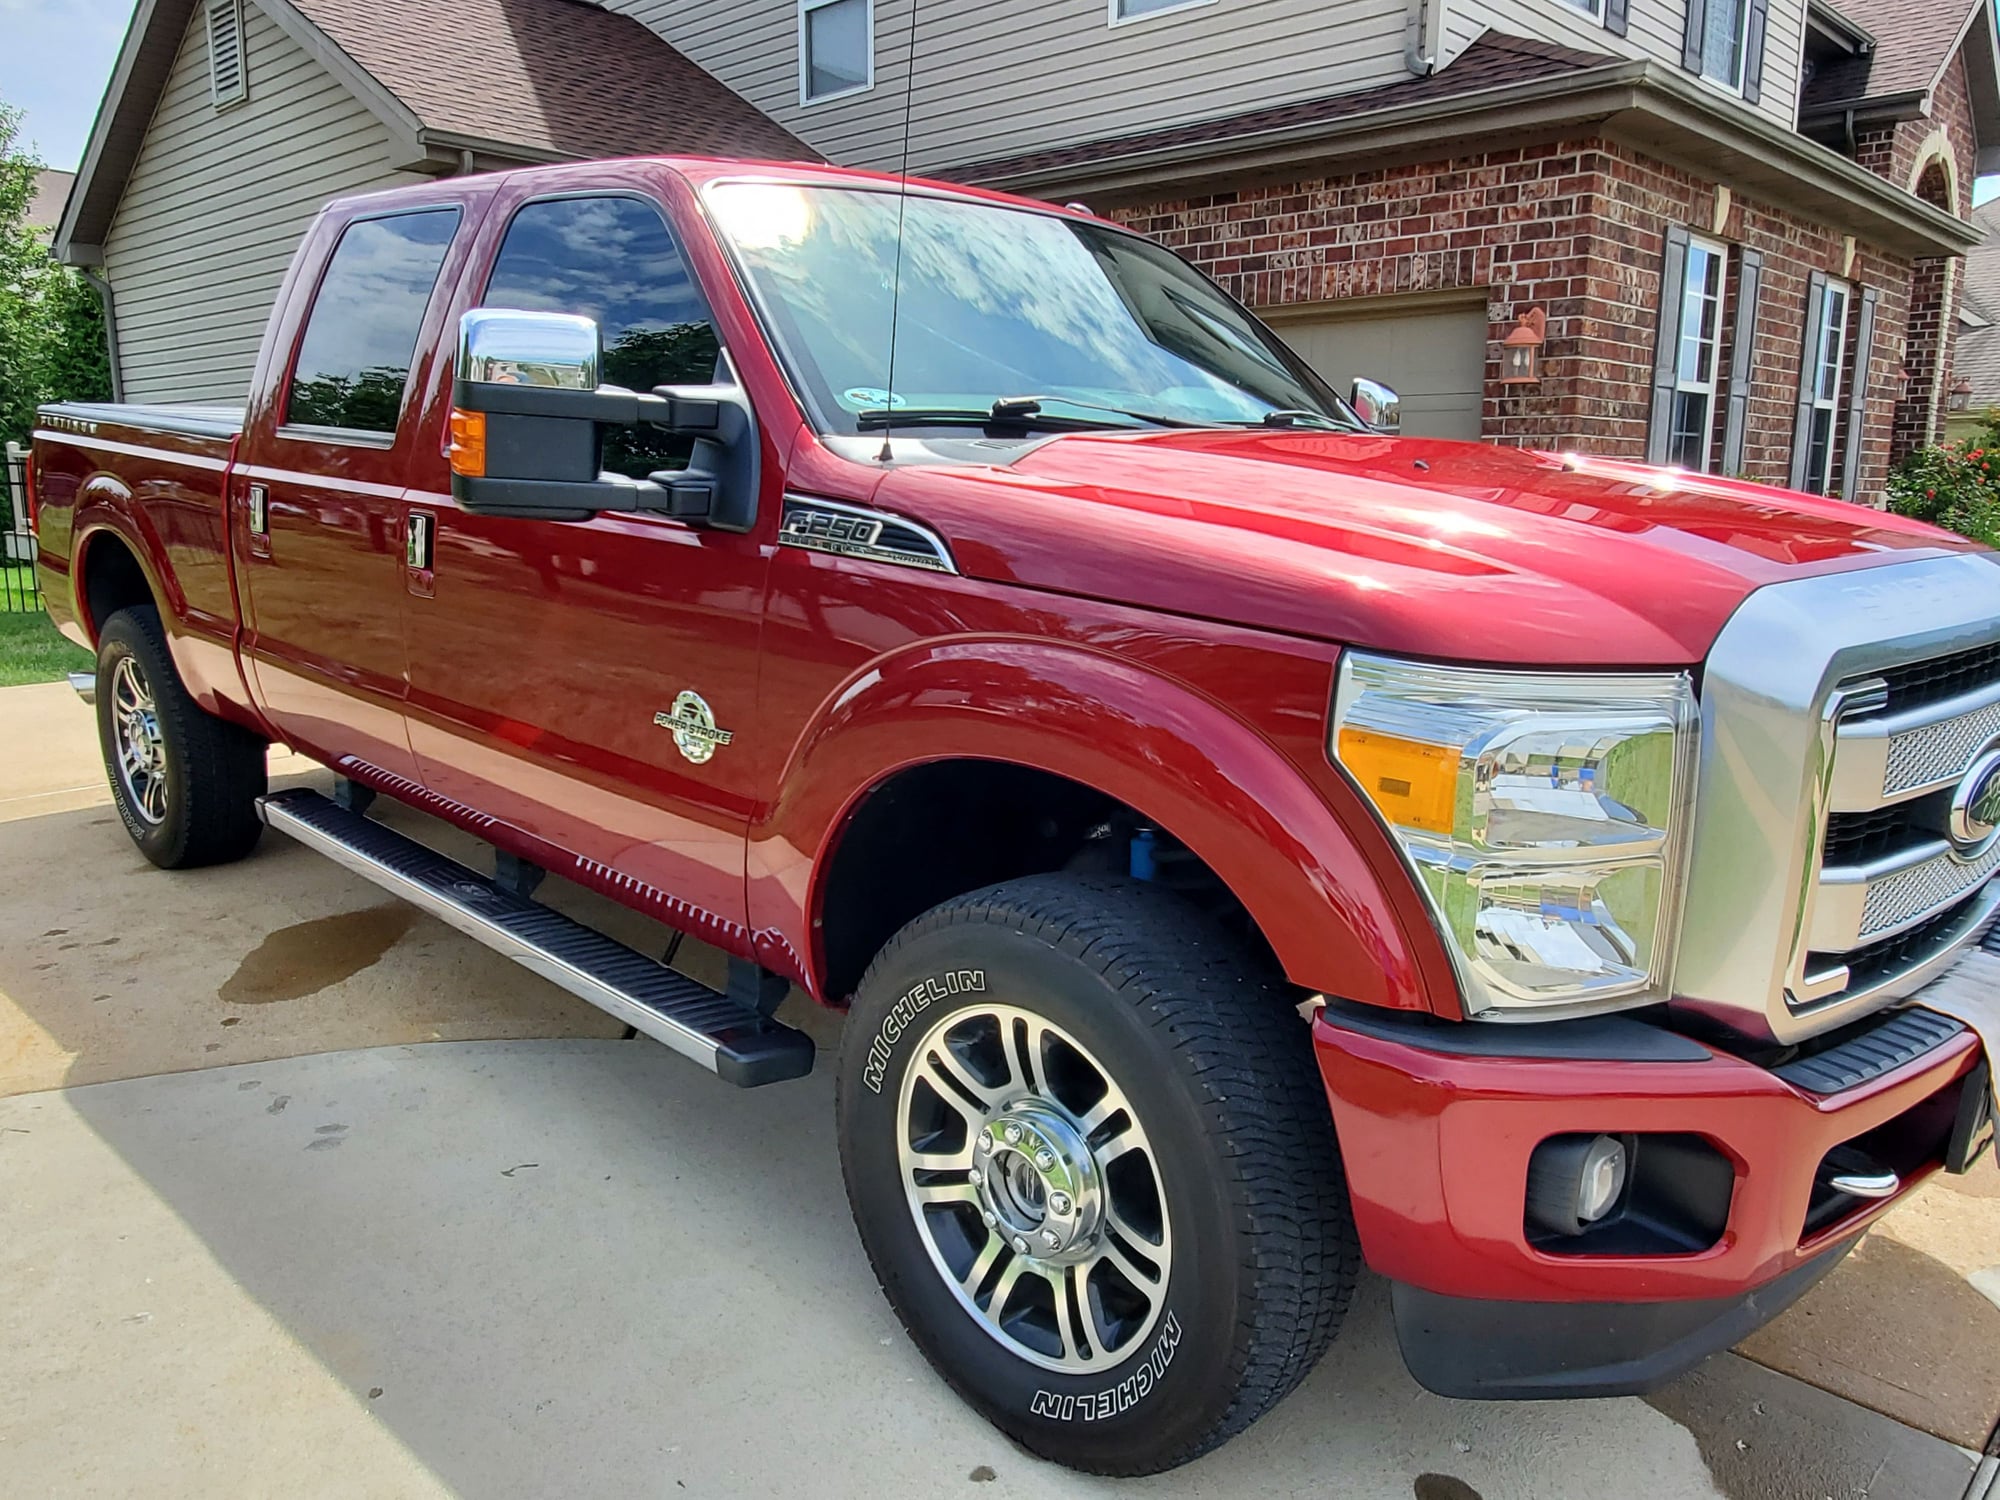 2015 Ford F-250 Super Duty - 2015 Ford F250 (F-250) Platinum Diesel - Used - VIN 1FT7W2BT5FED36450 - 127,500 Miles - 8 cyl - 4WD - Automatic - Truck - Red - Saint Louis, MO 63129, United States